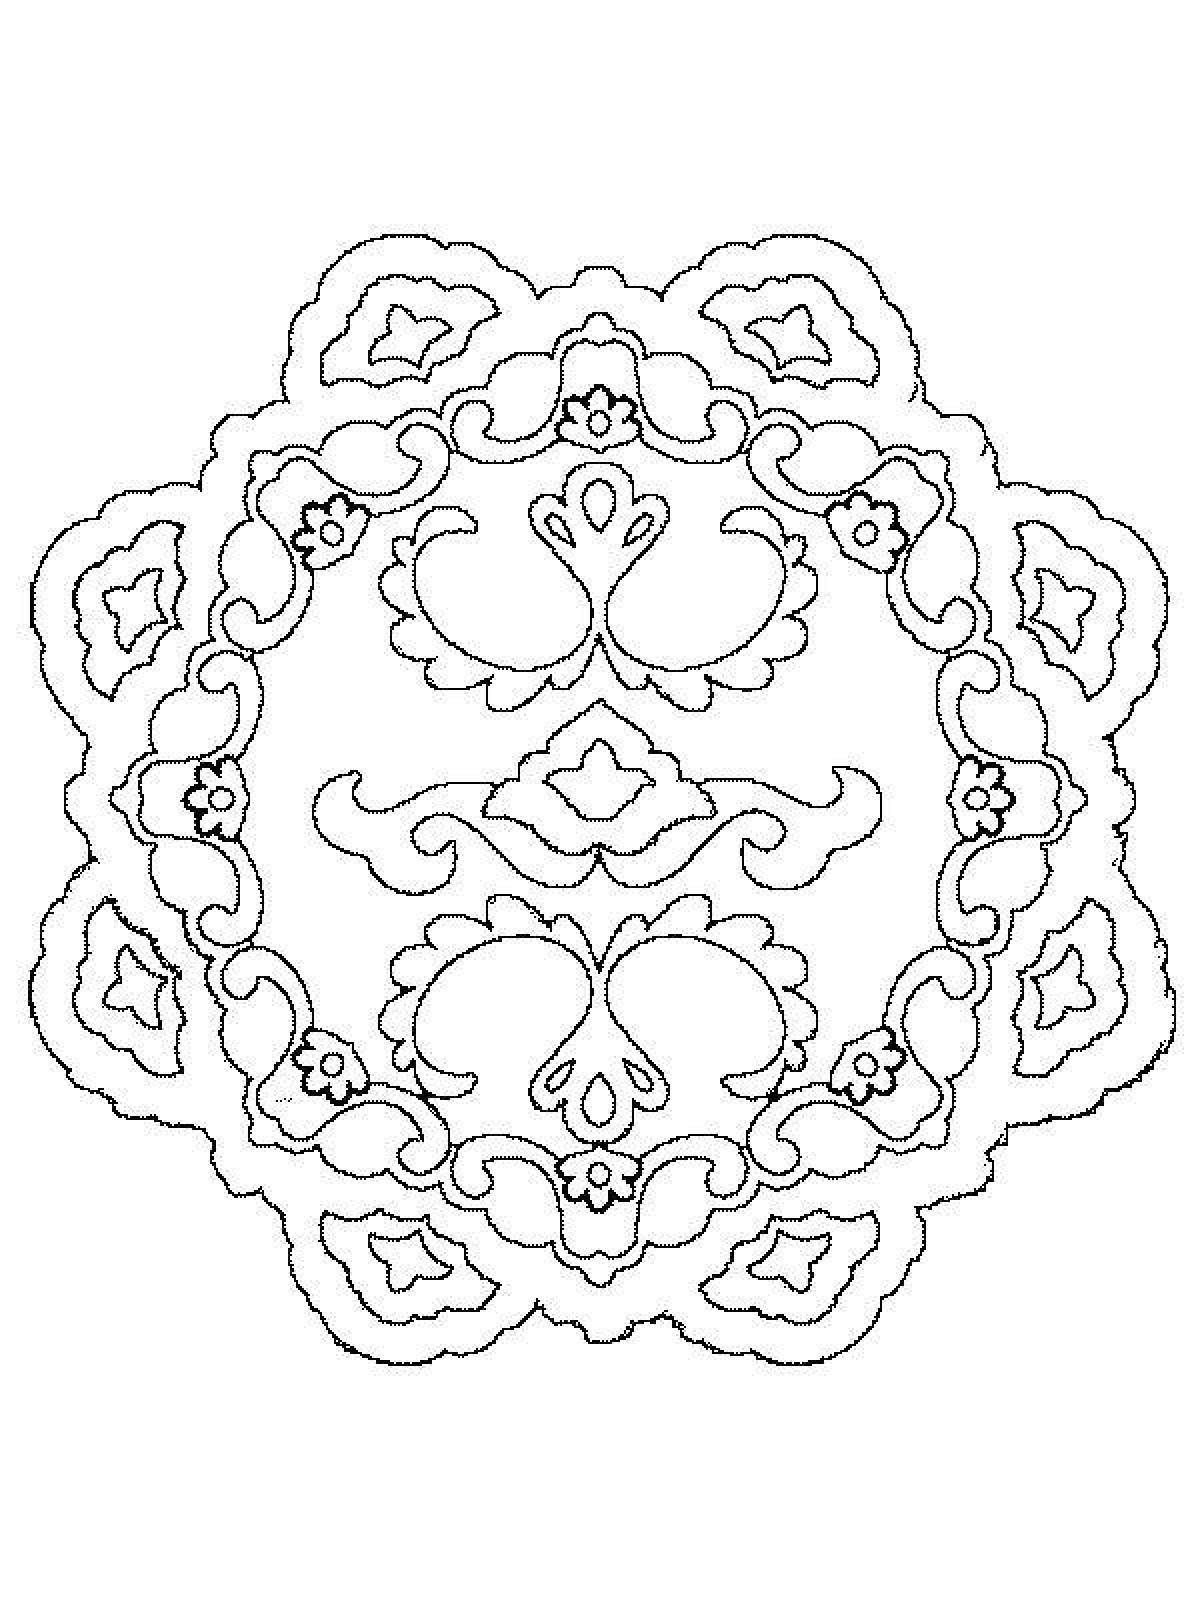 Fancy Tatar ornament coloring page